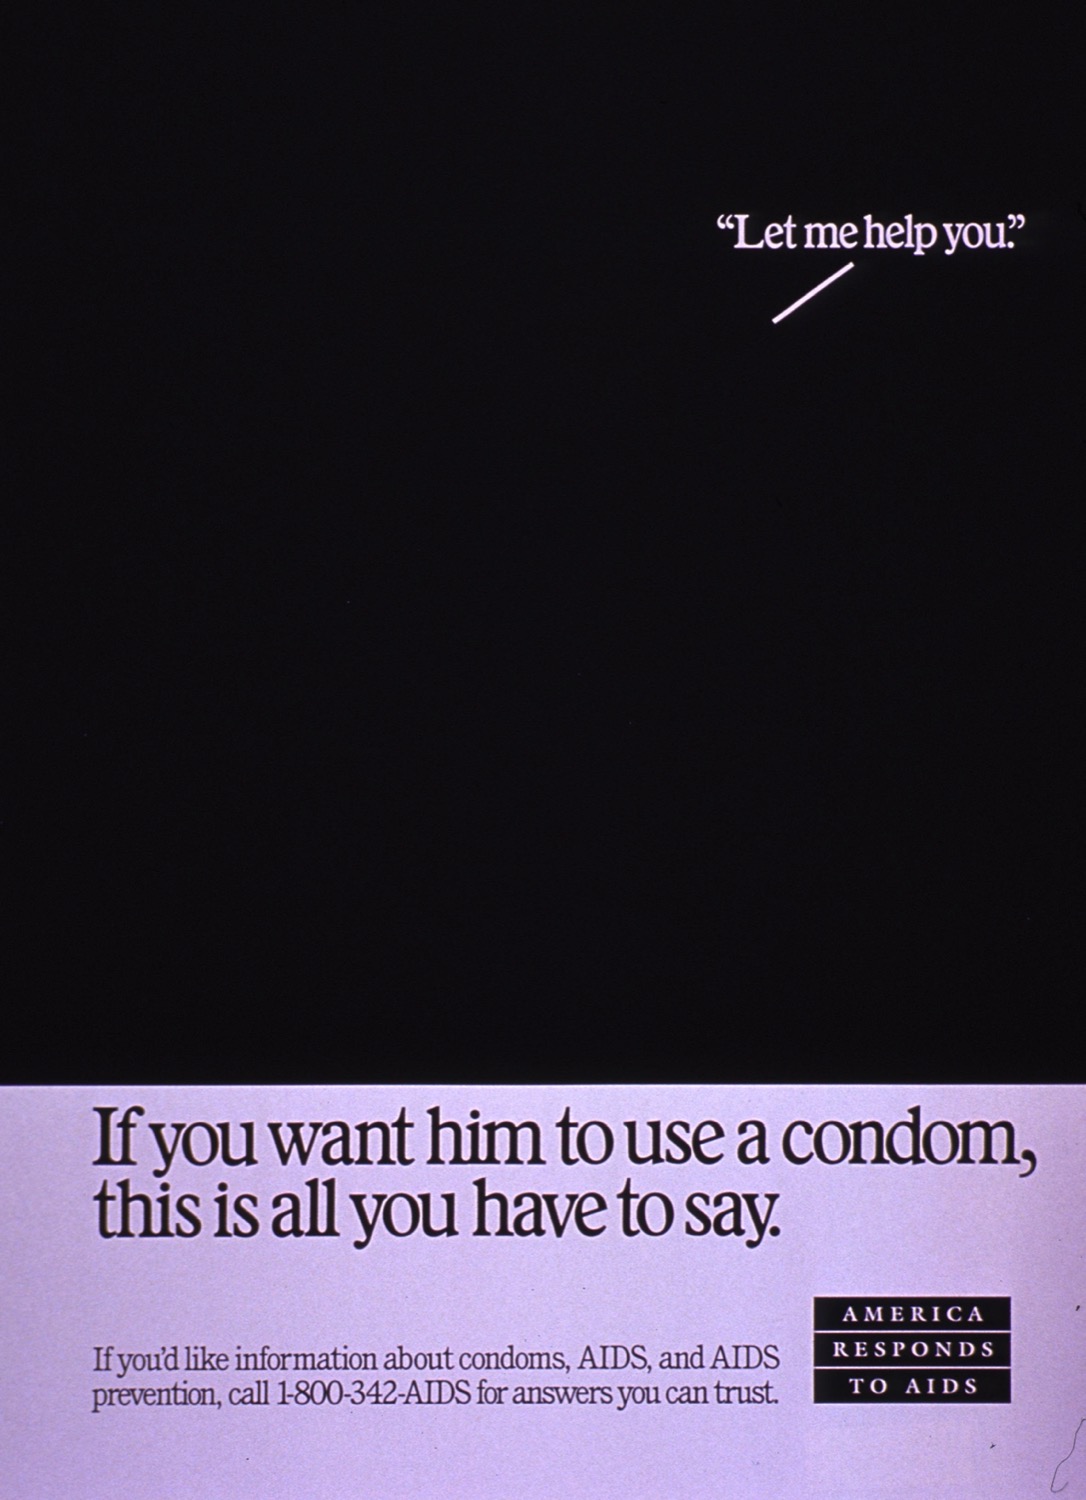 a poster that is primarily black with the words in quotes "let me help you." beneath the black portion is a box that reads " if you want him to use a condom, this is all you have to say." "america responds to aids"